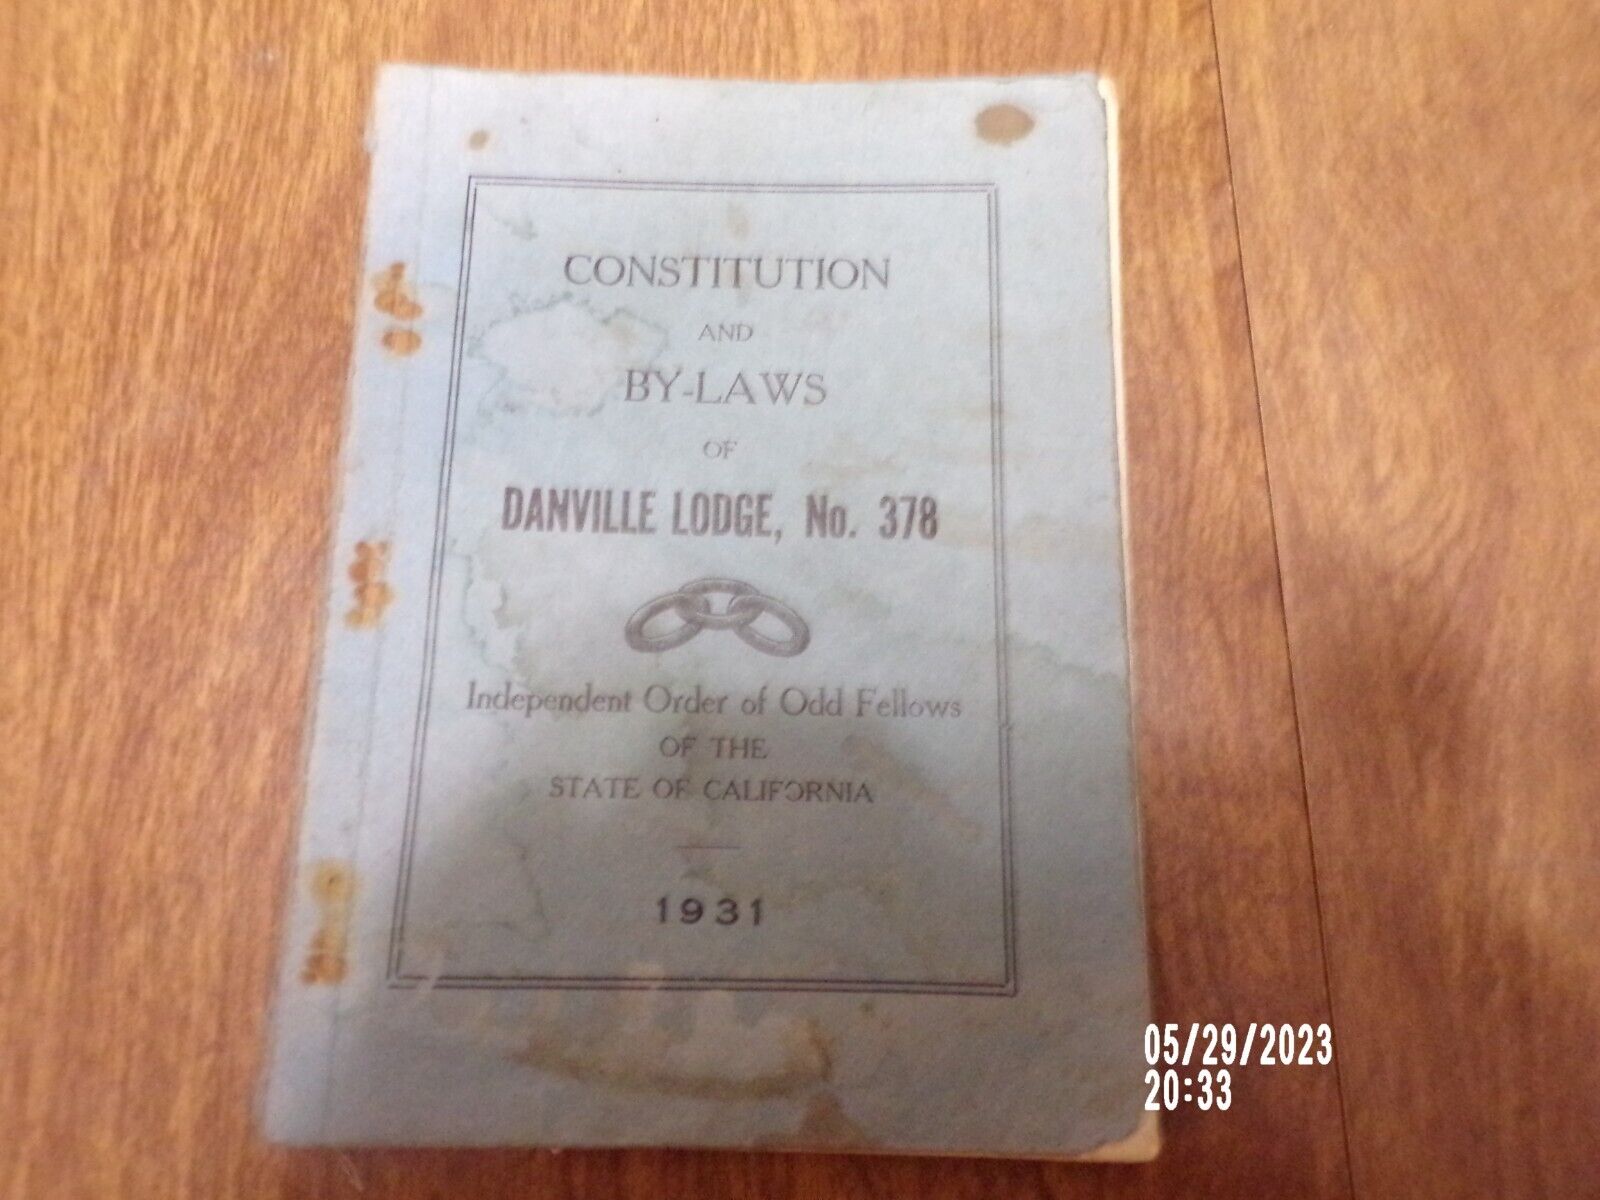 Independent Order of Odd Fellows Constitution & bylaws